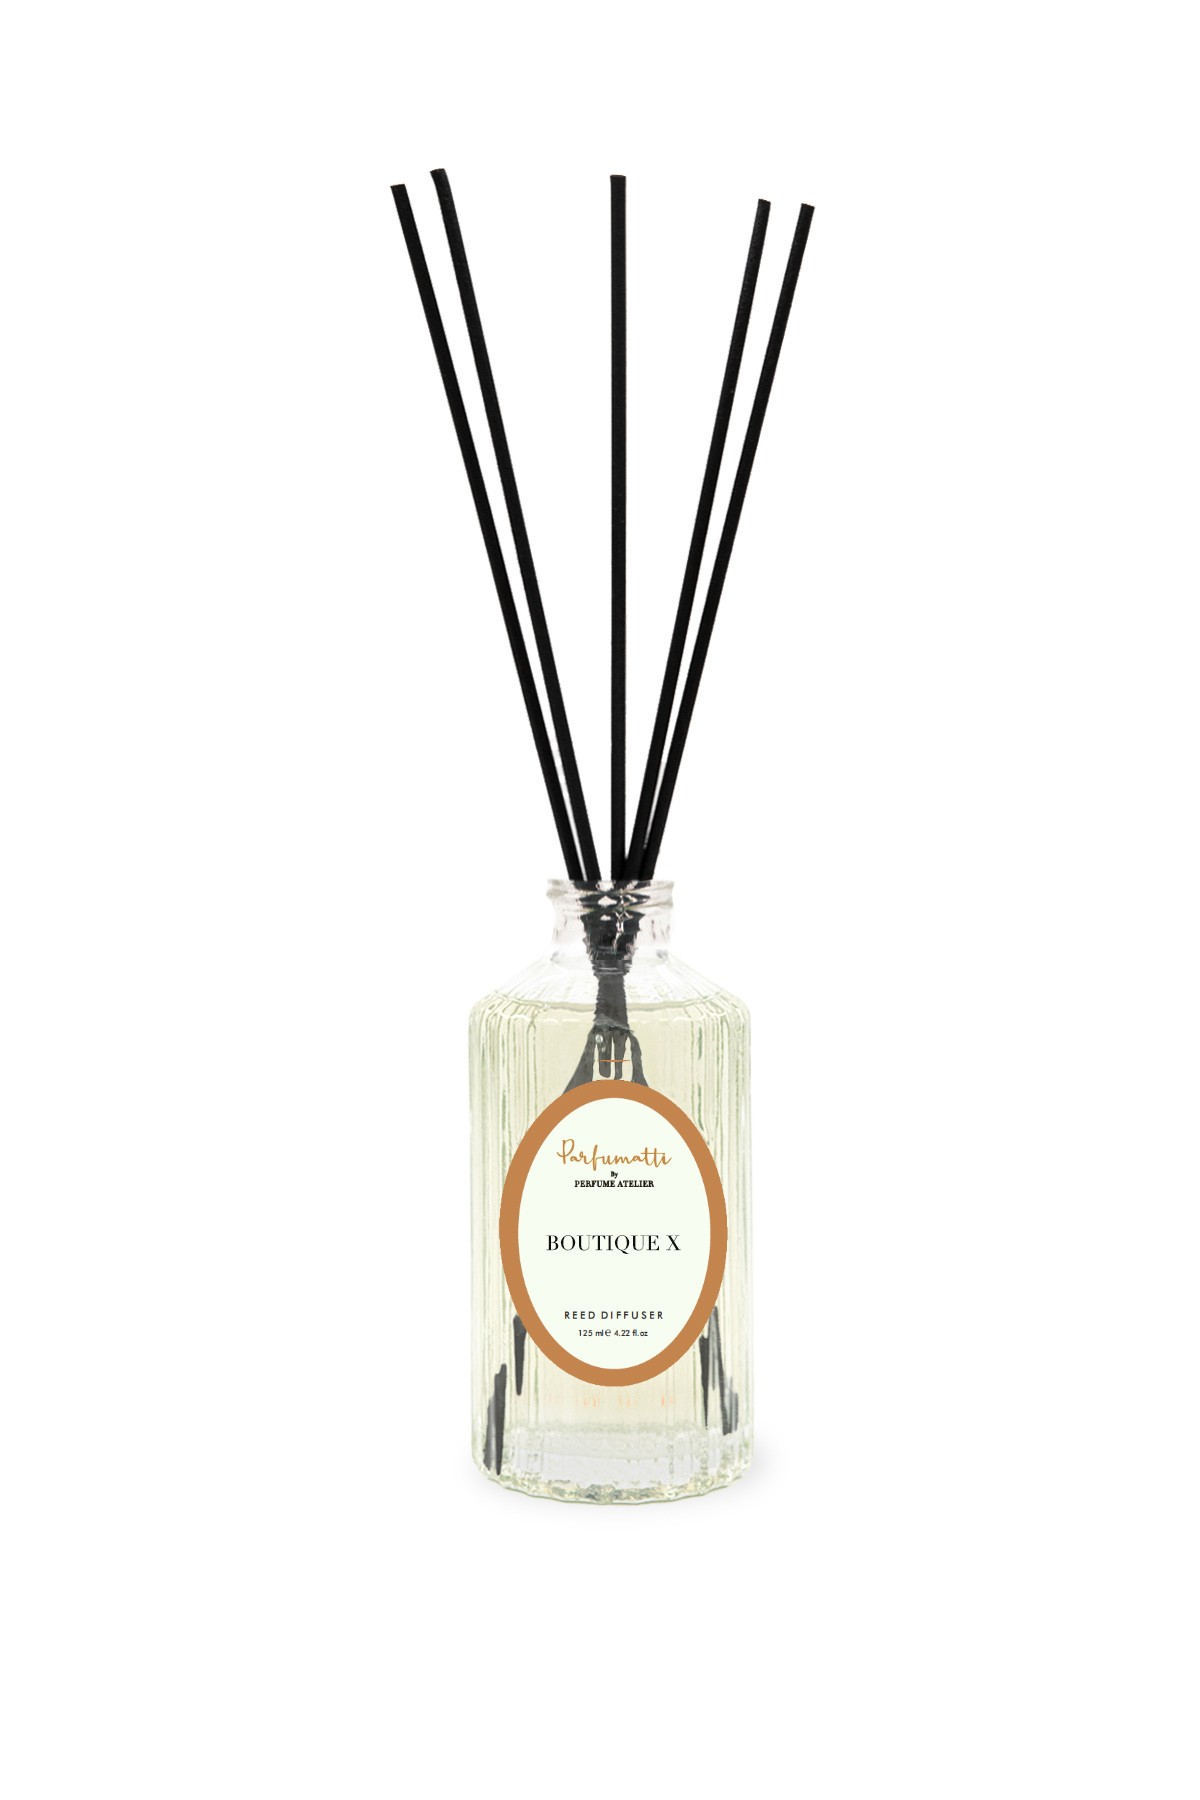 BOUTIQUE X 125 Ml Reed Diffuser